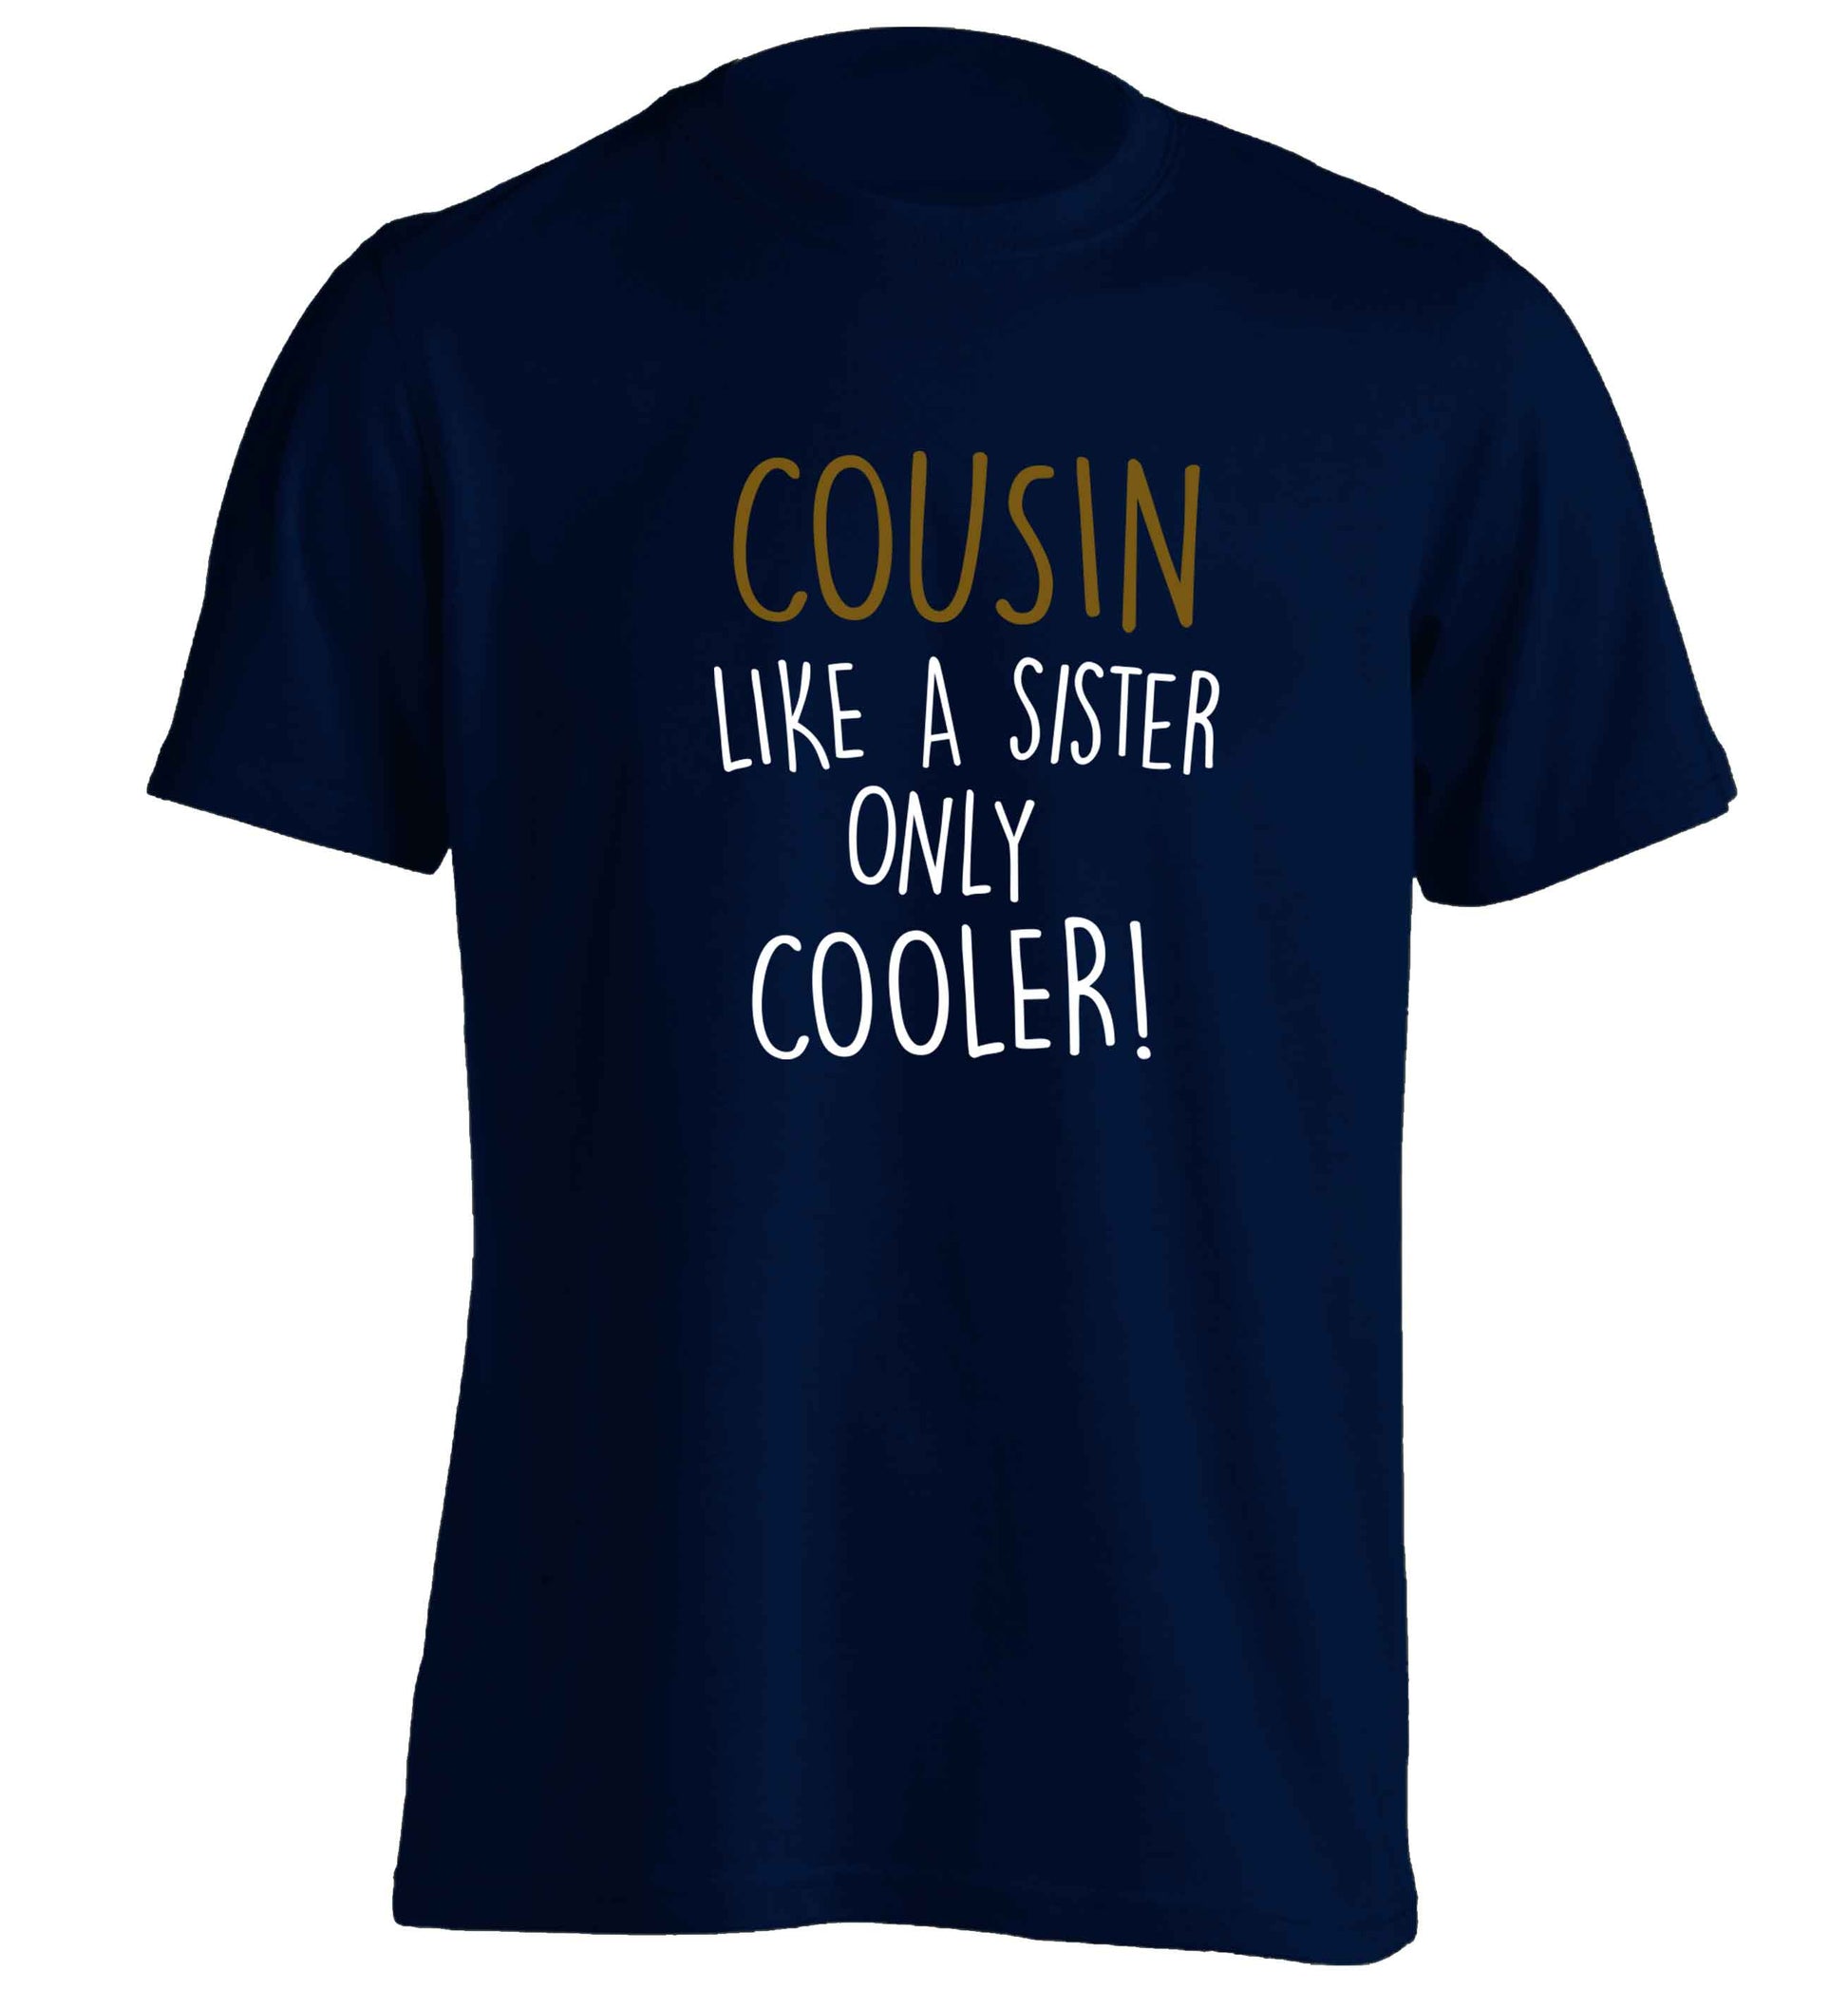 Cousin like a sister only cooler adults unisex navy Tshirt 2XL